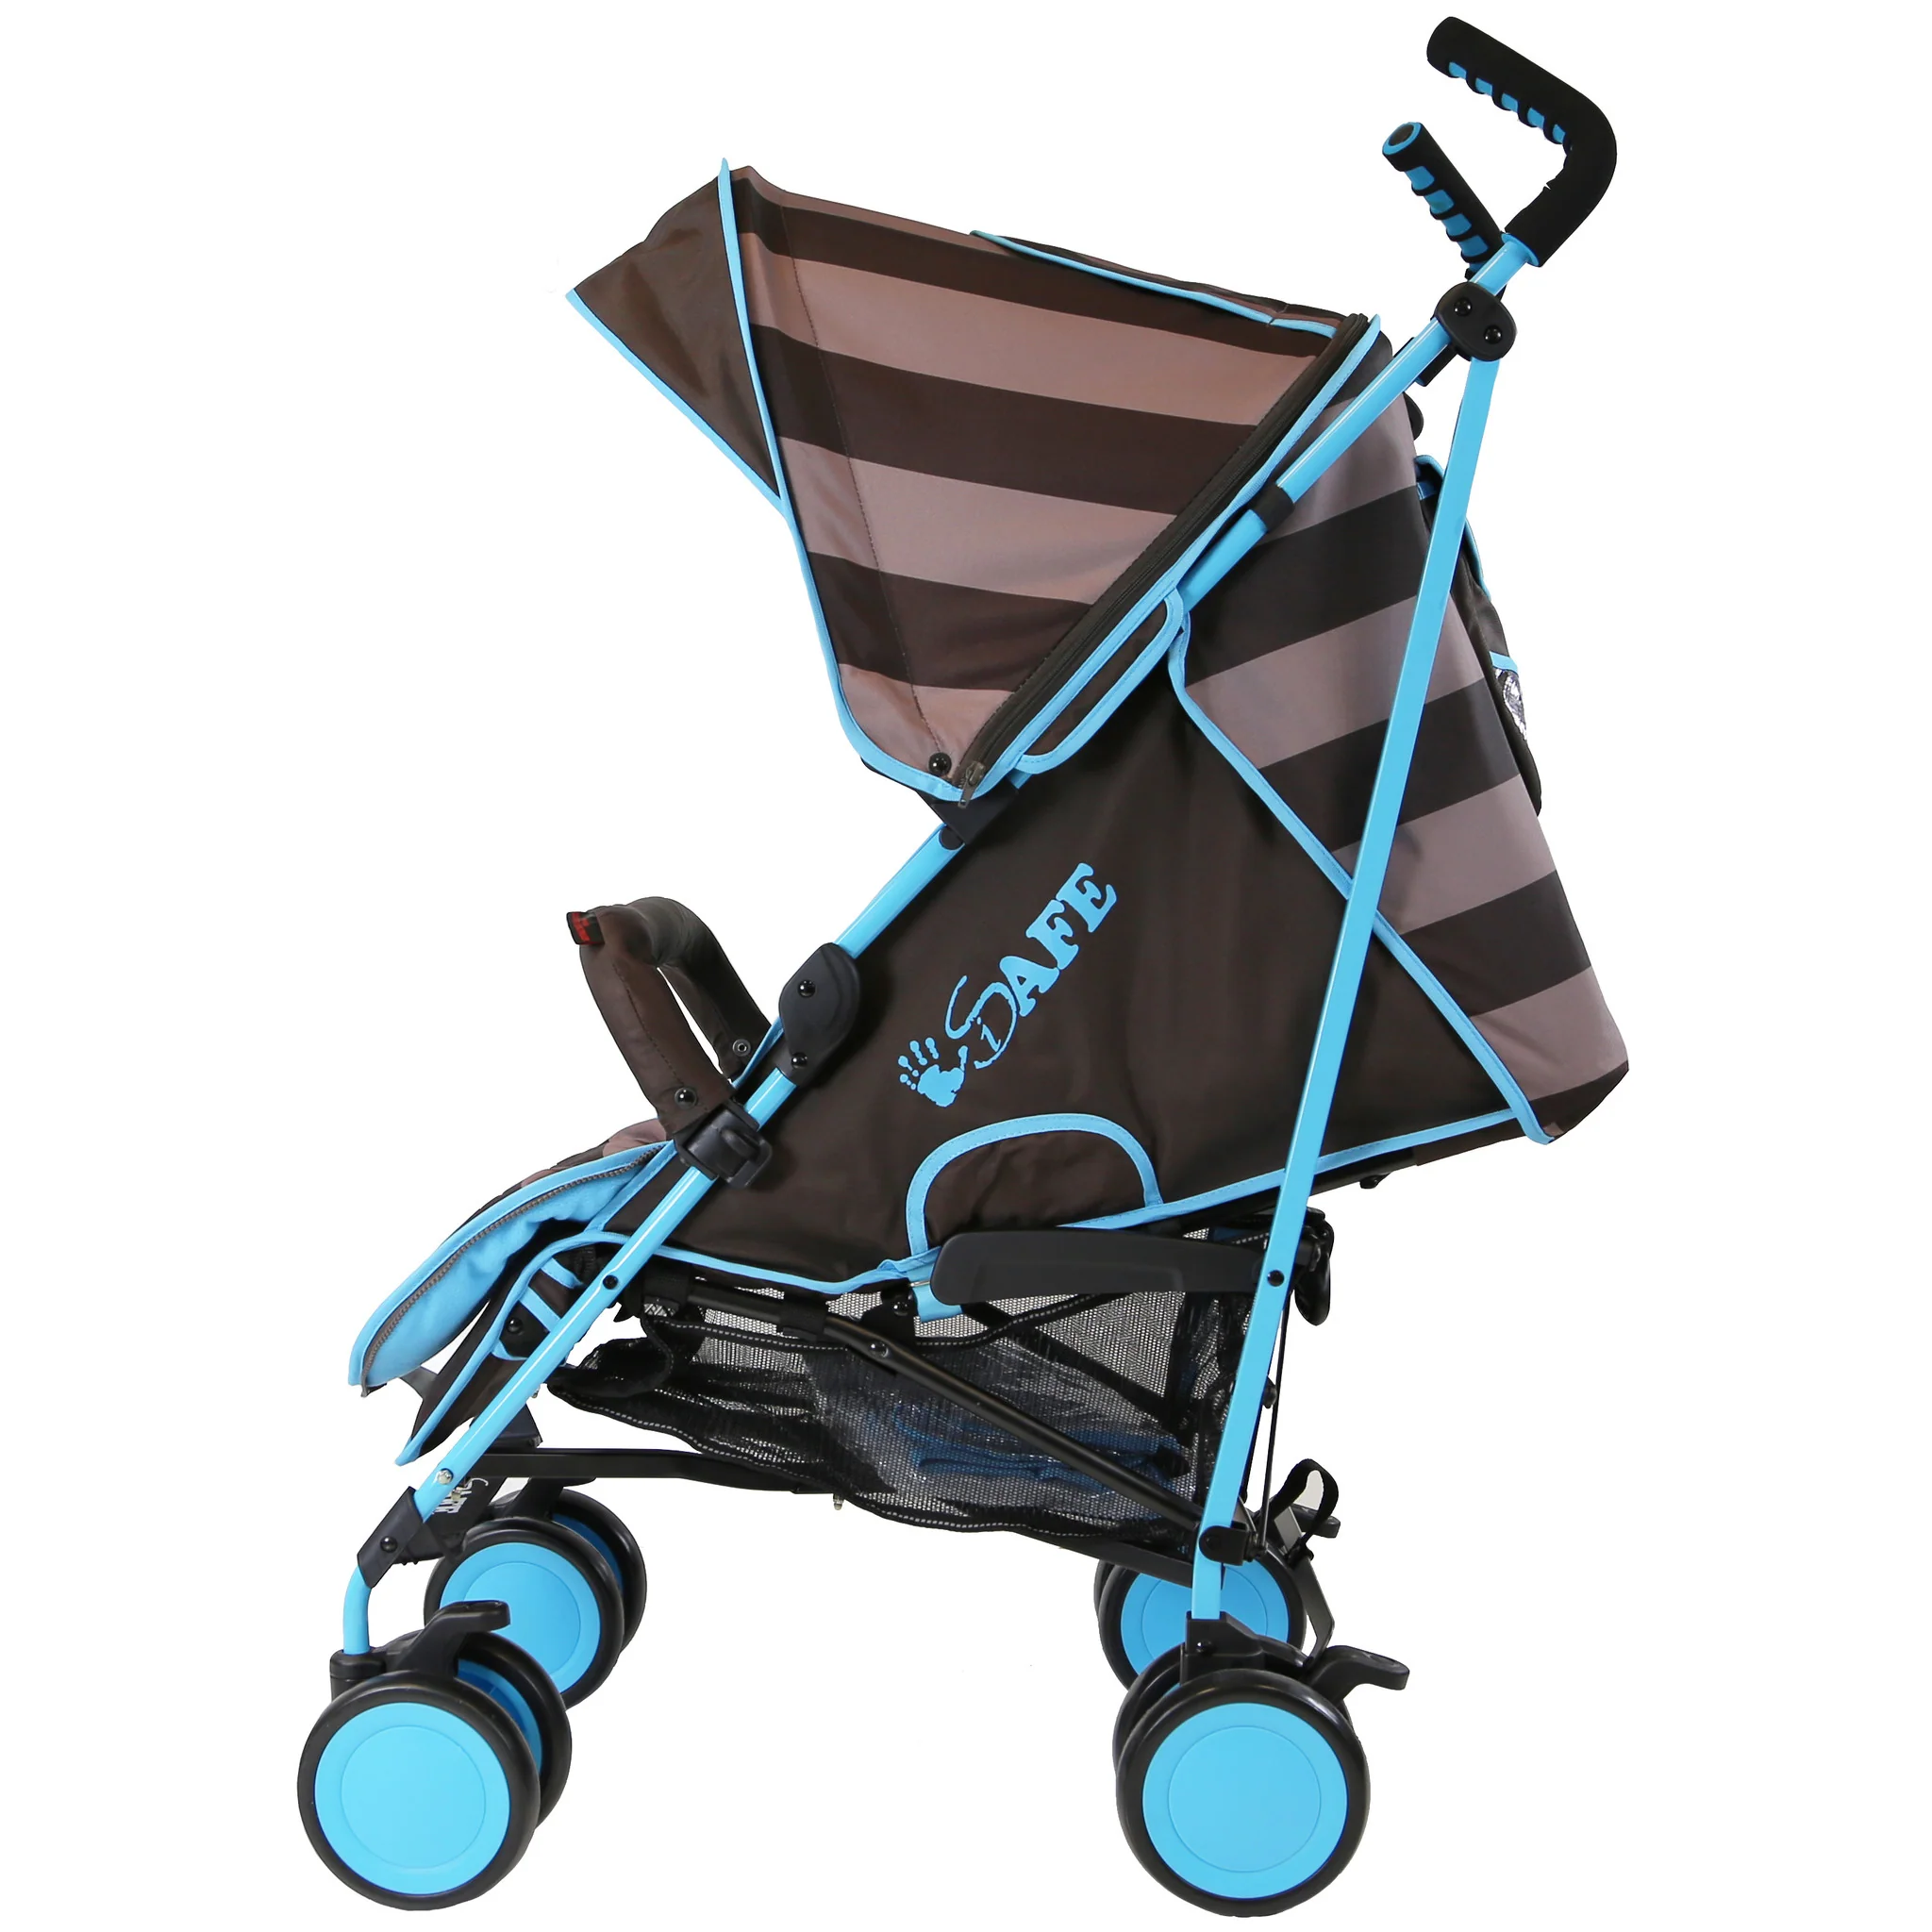 Raincover iSafe Stroller Foxy Design Complete with Footmuff Headhugger Bumper Bar